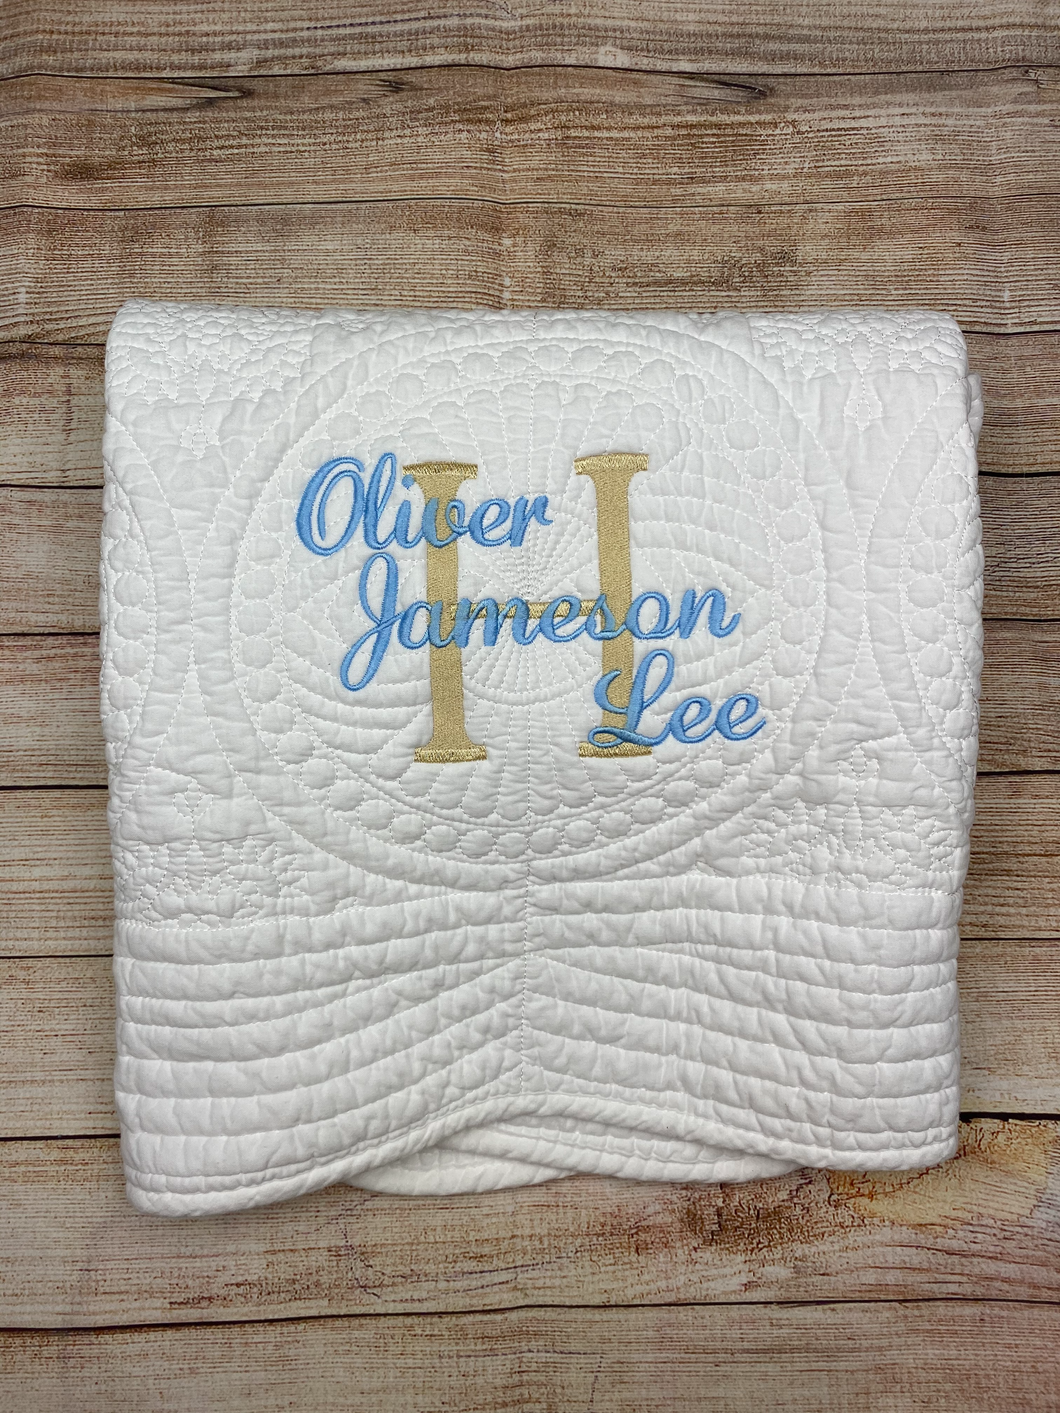 Monogrammed Baby Quilt, Personalized Blanket, Gold Monogrammed Blanket, Boy Quilt, Crib